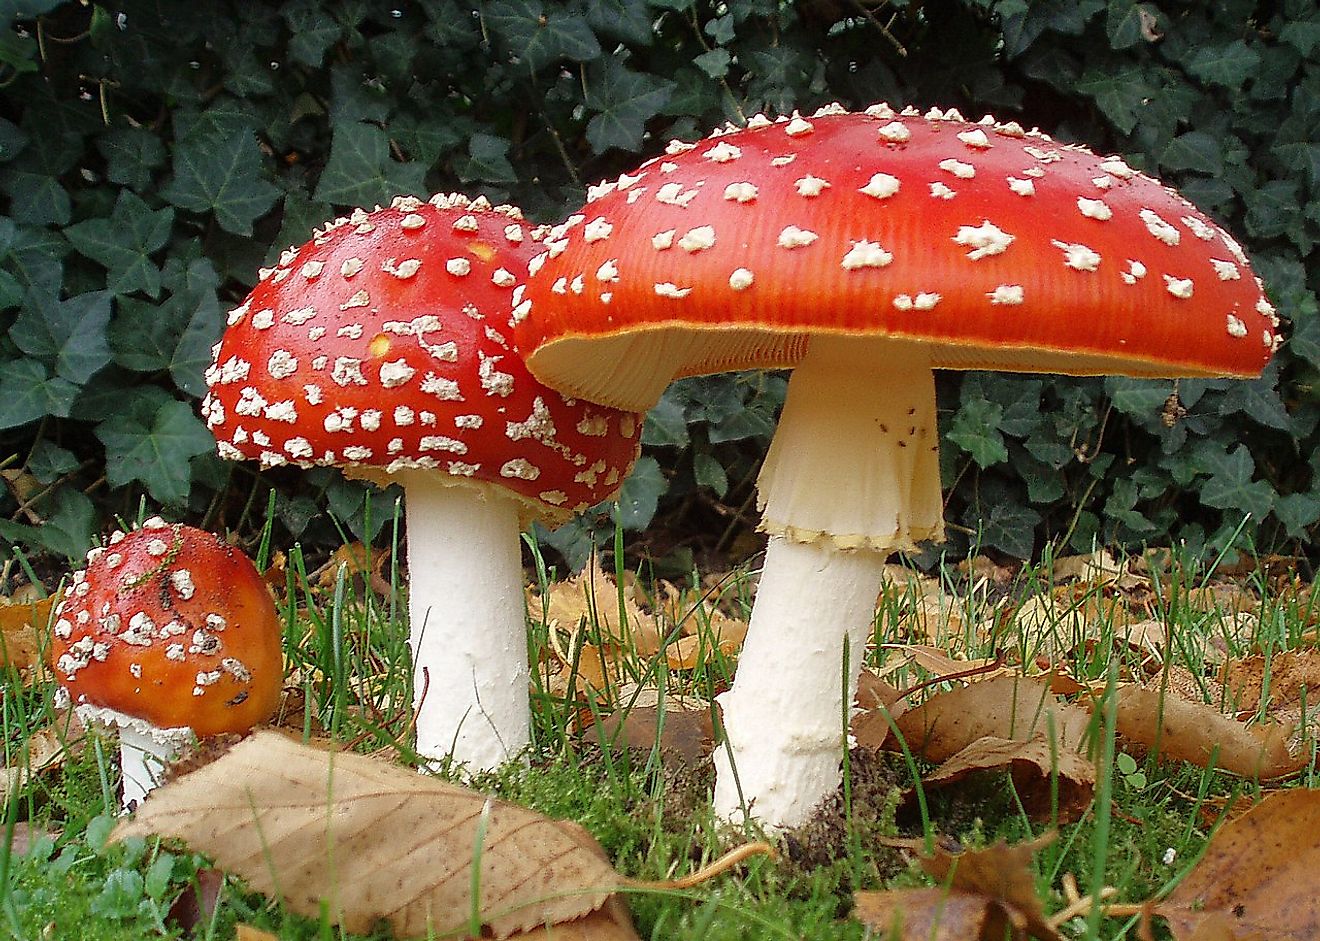 Showing three stages as the Fly Agaric mushroom matures. 